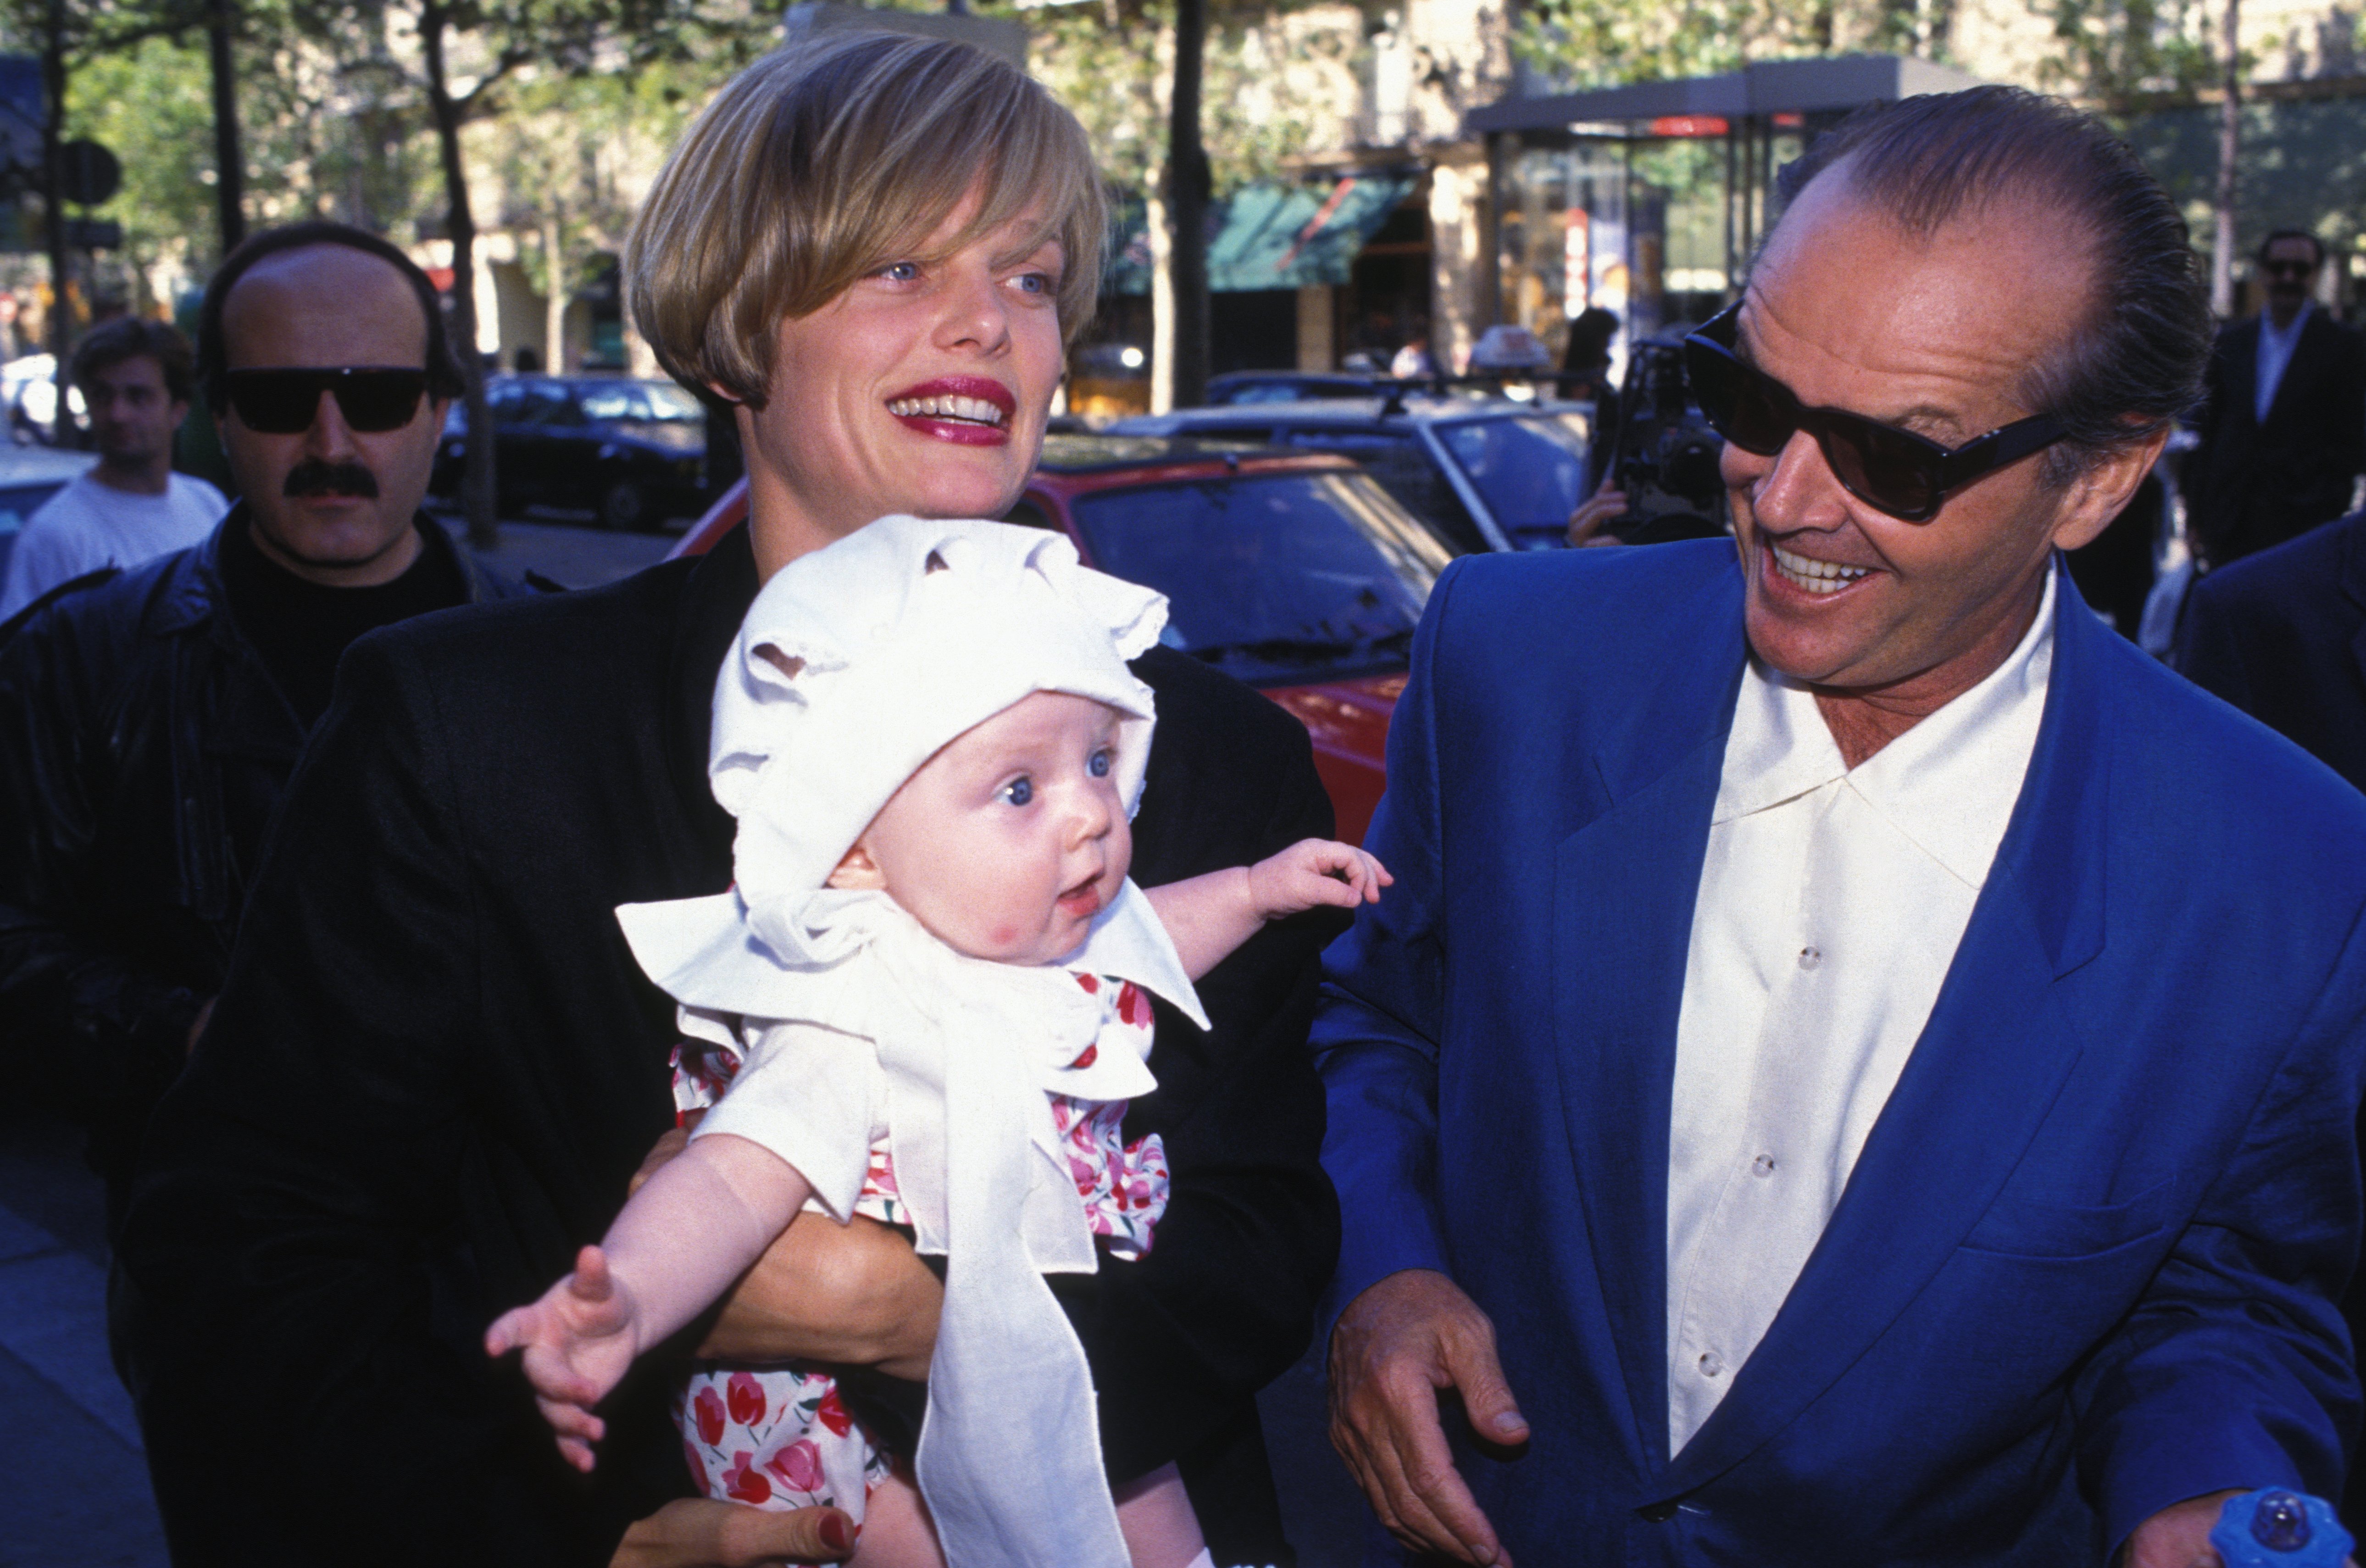 Jack Nicholson with Rebecca Broussard and their daughter Lorraine in Paris in July 1994, in France | Source: Getty Images